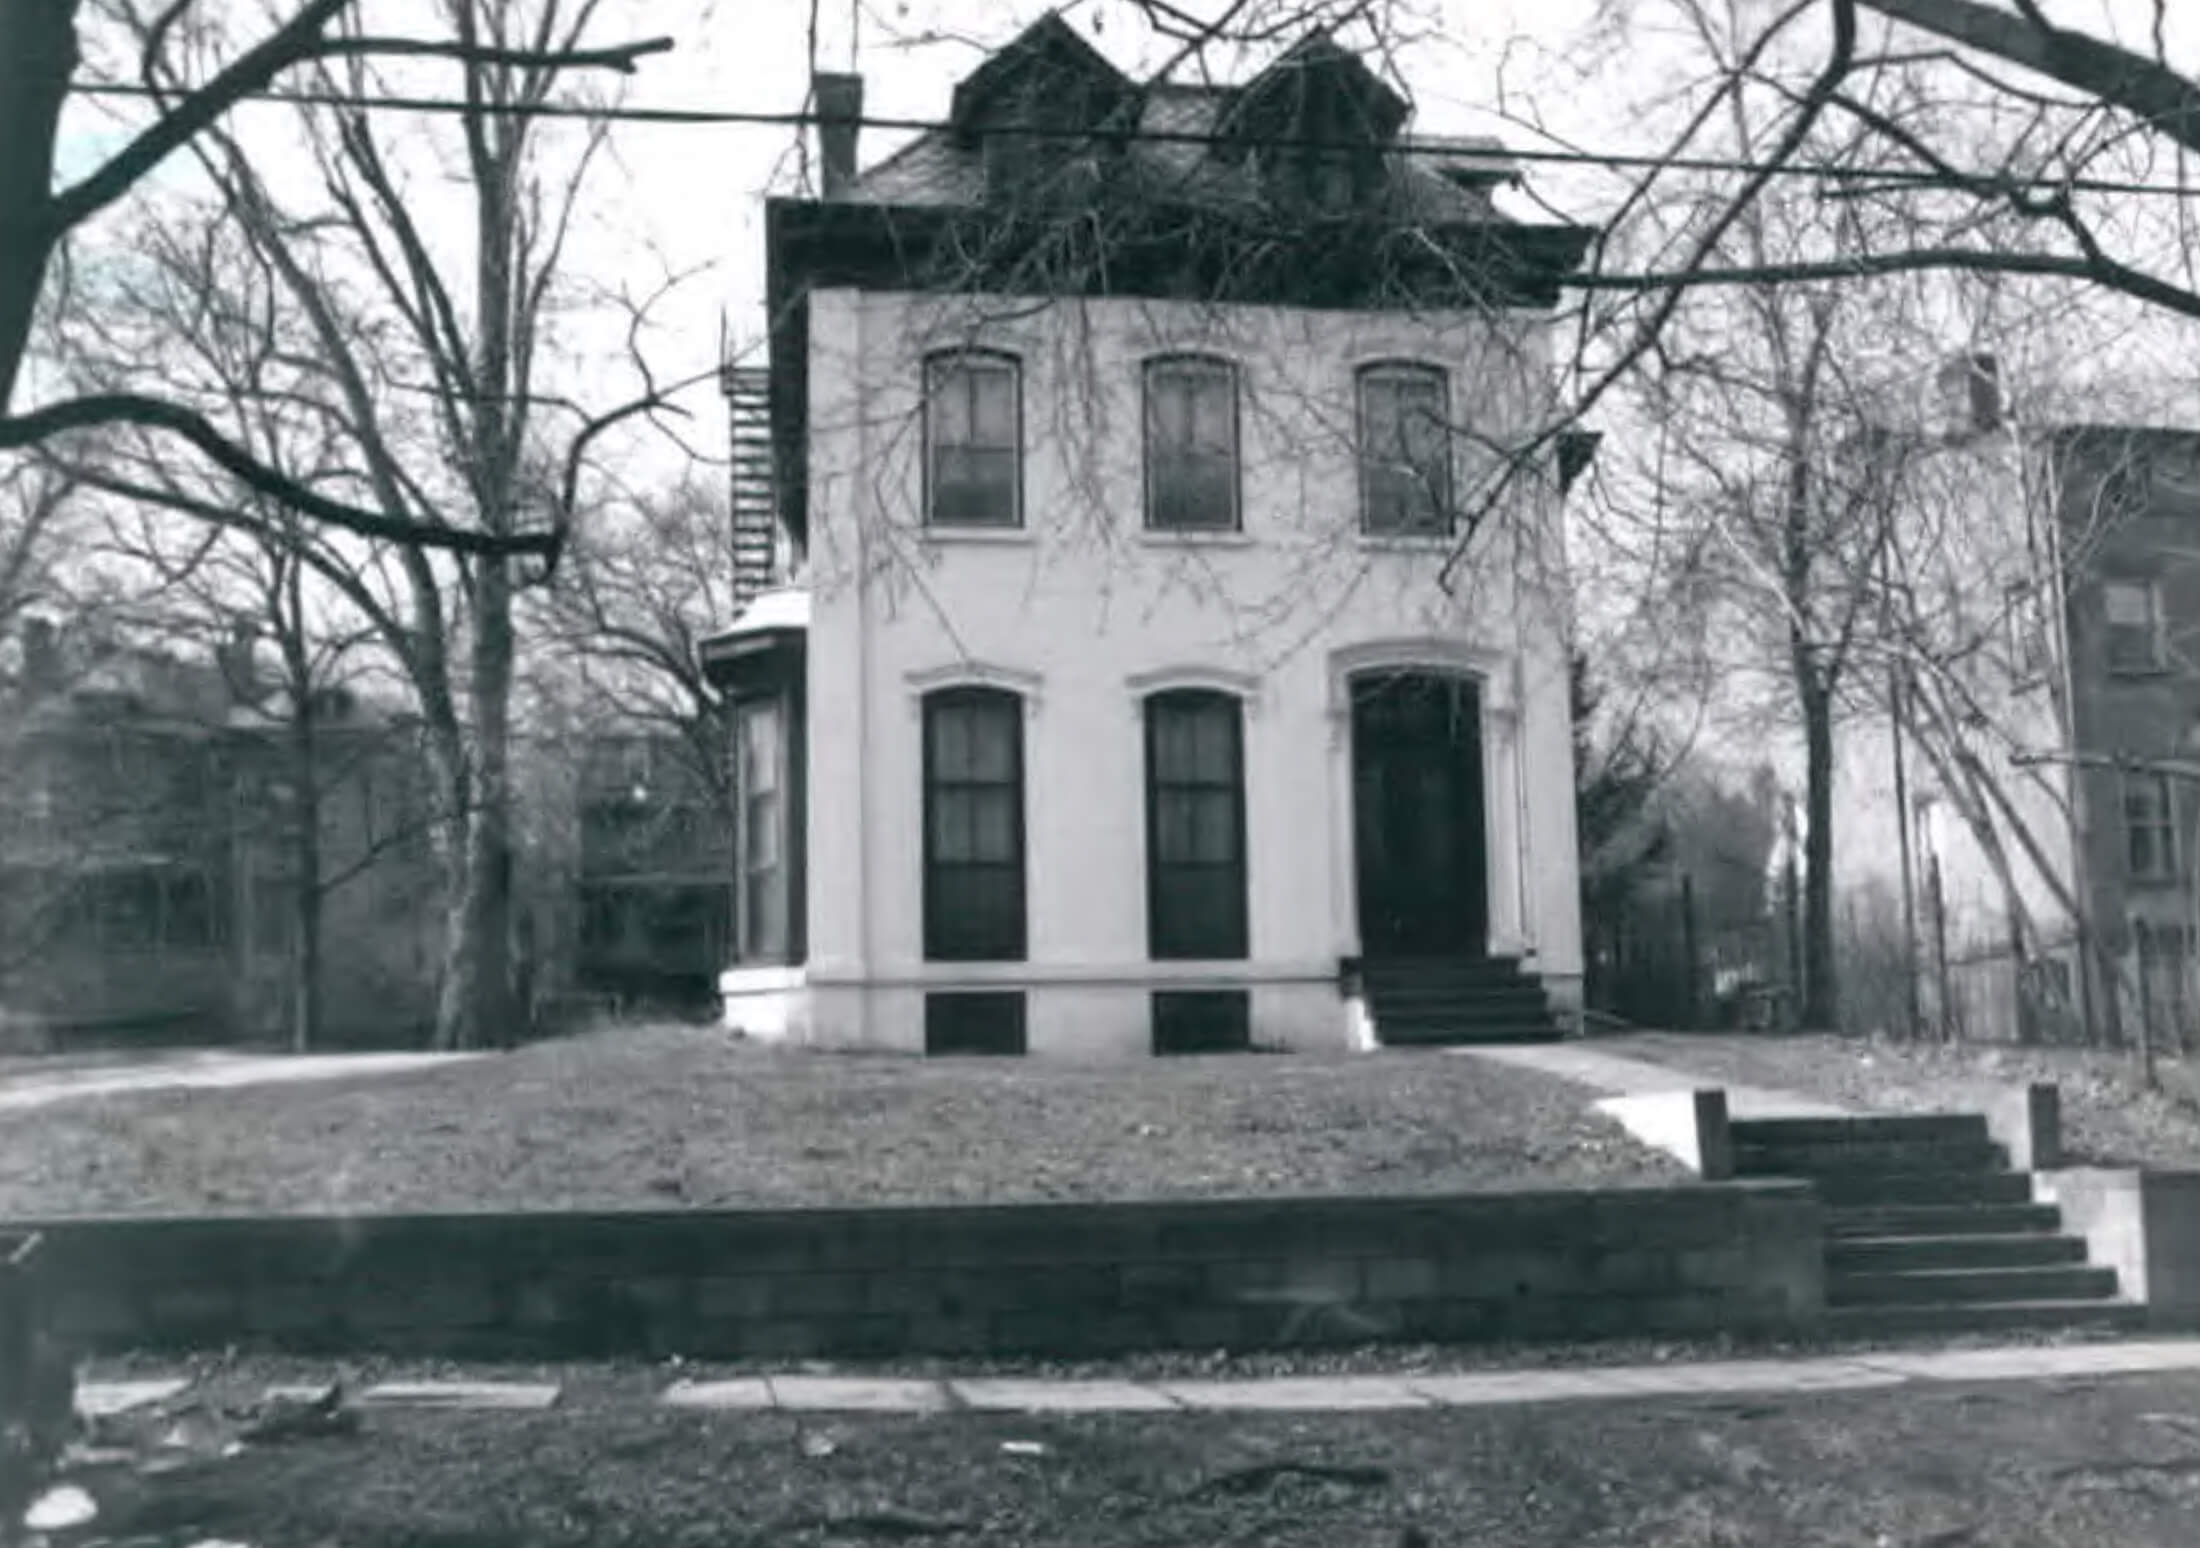 exterior of the house in 1970